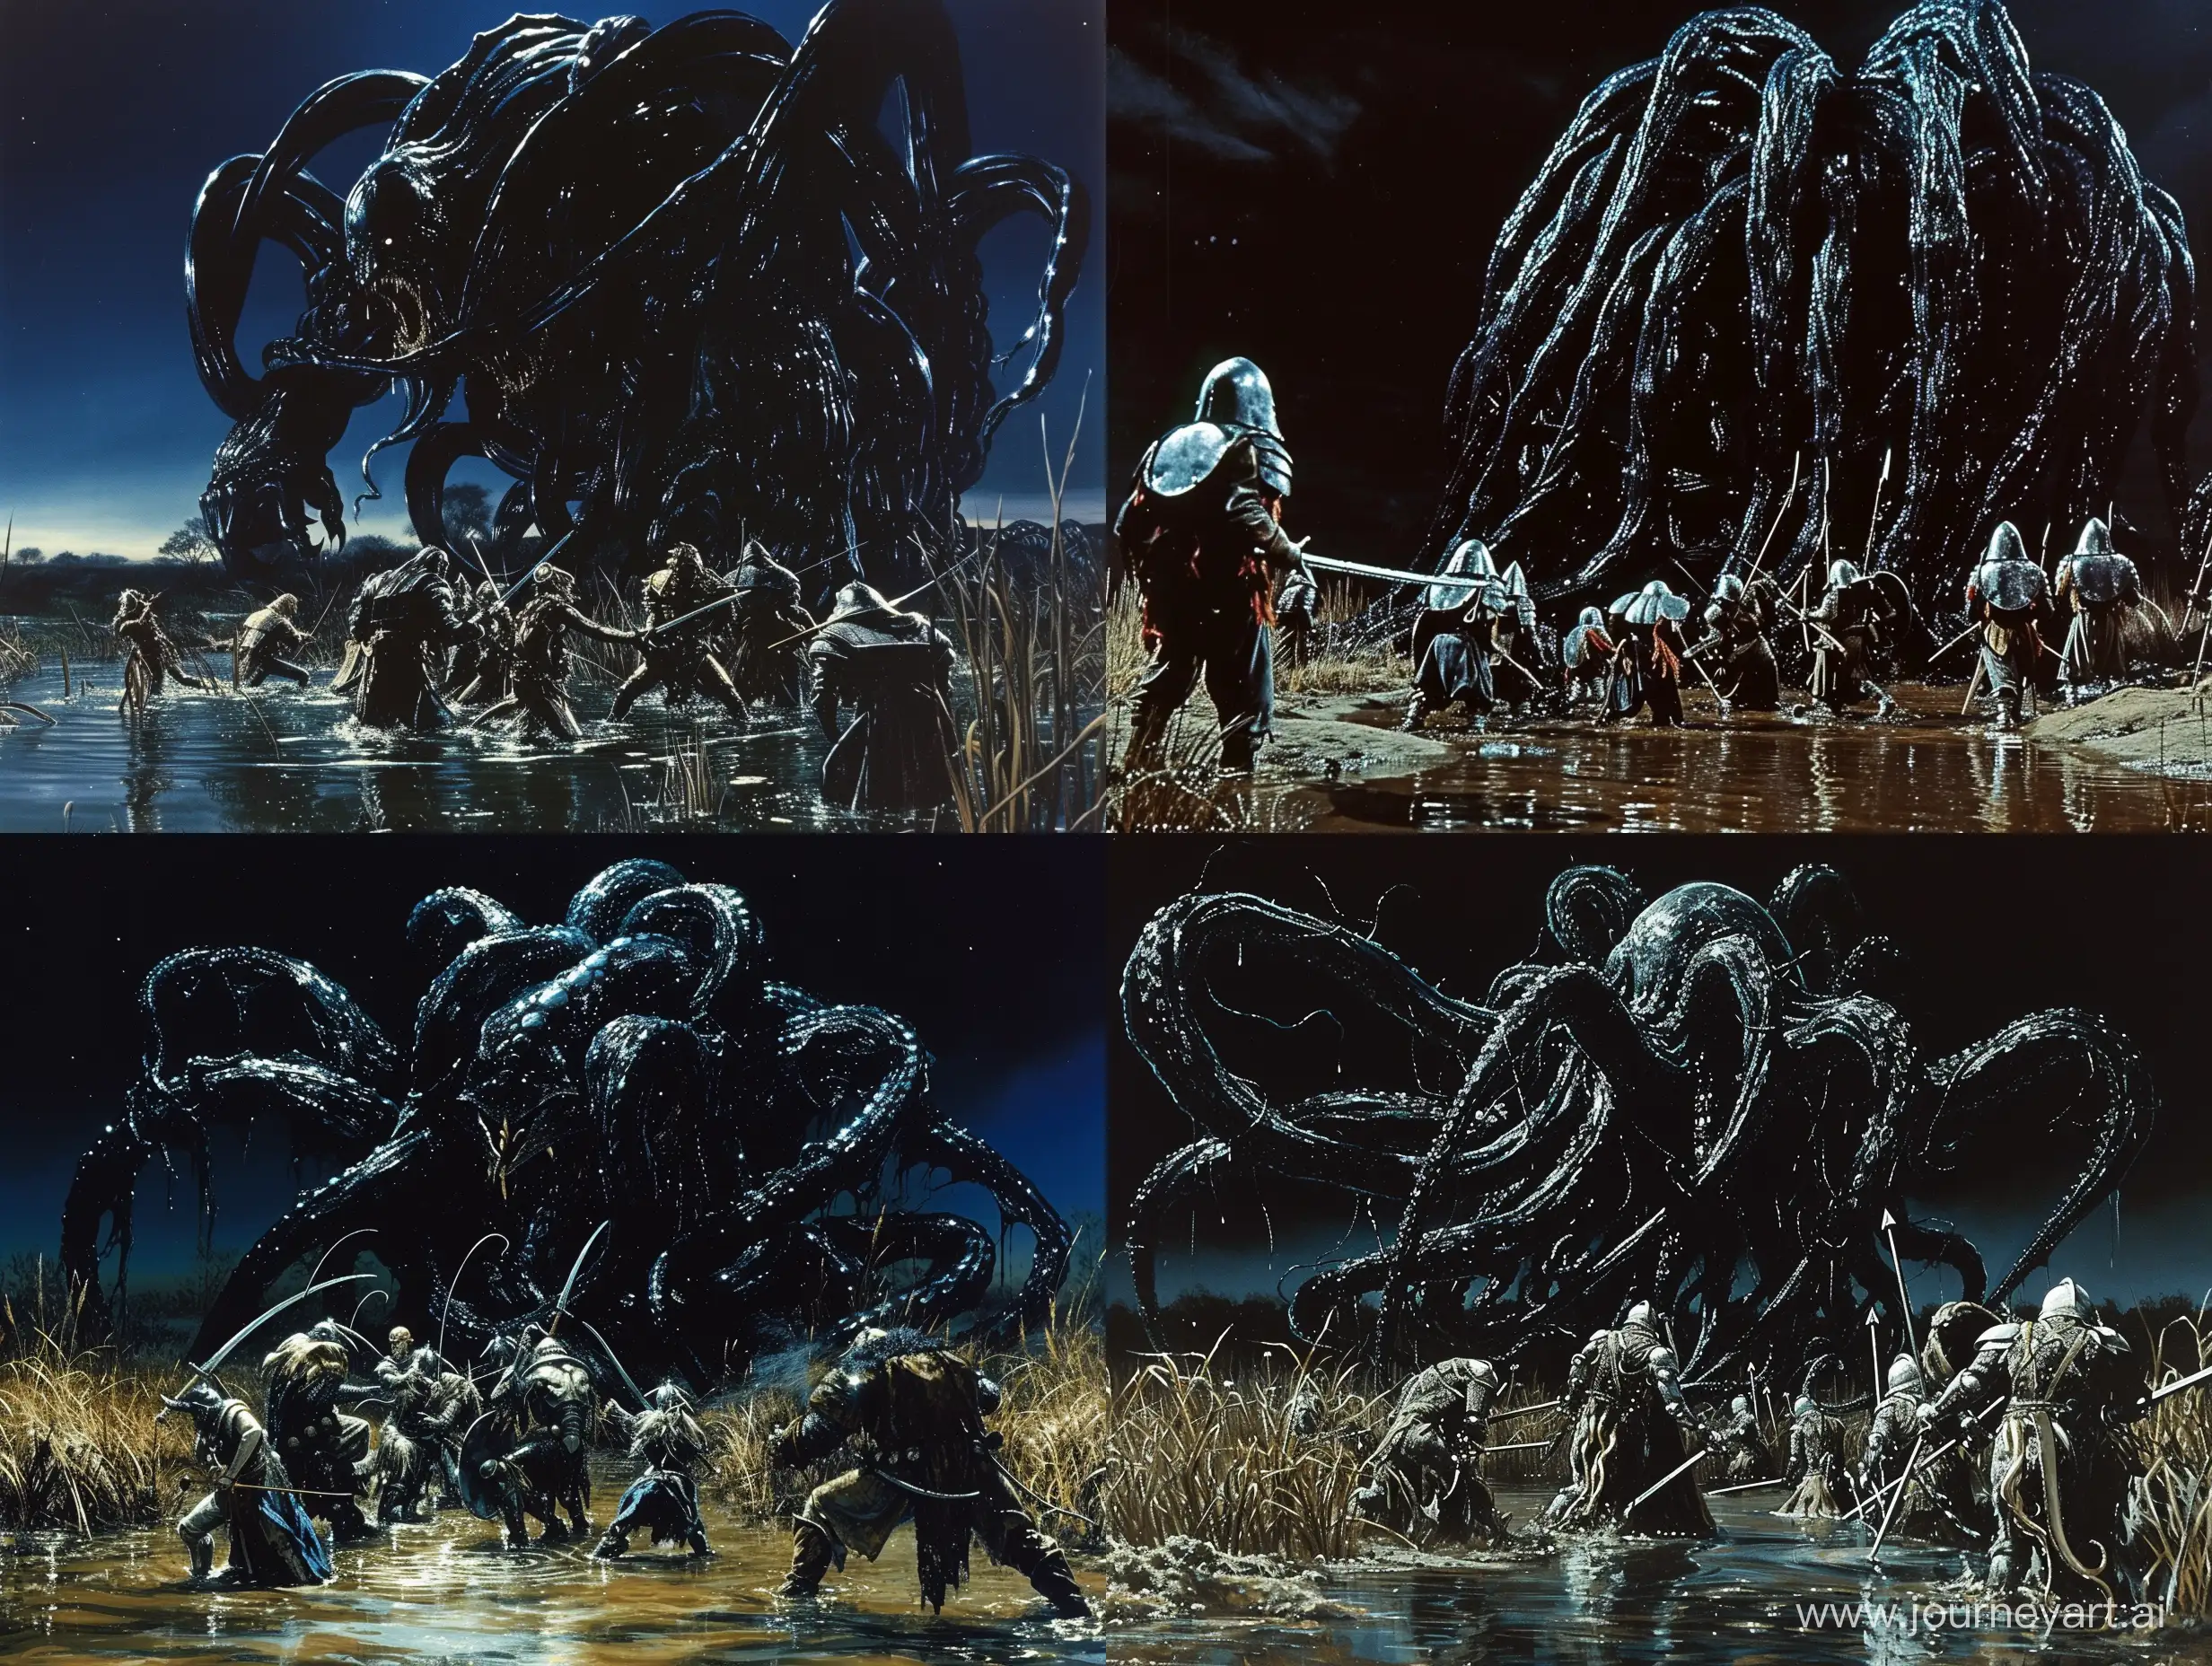 dvd screenengrabs character/arx fatalis gargantuan glistening mass of black tentacles constricting a group of lightly armored warriors from a swampy marshland watery basin at night dark fantasy 1980 style